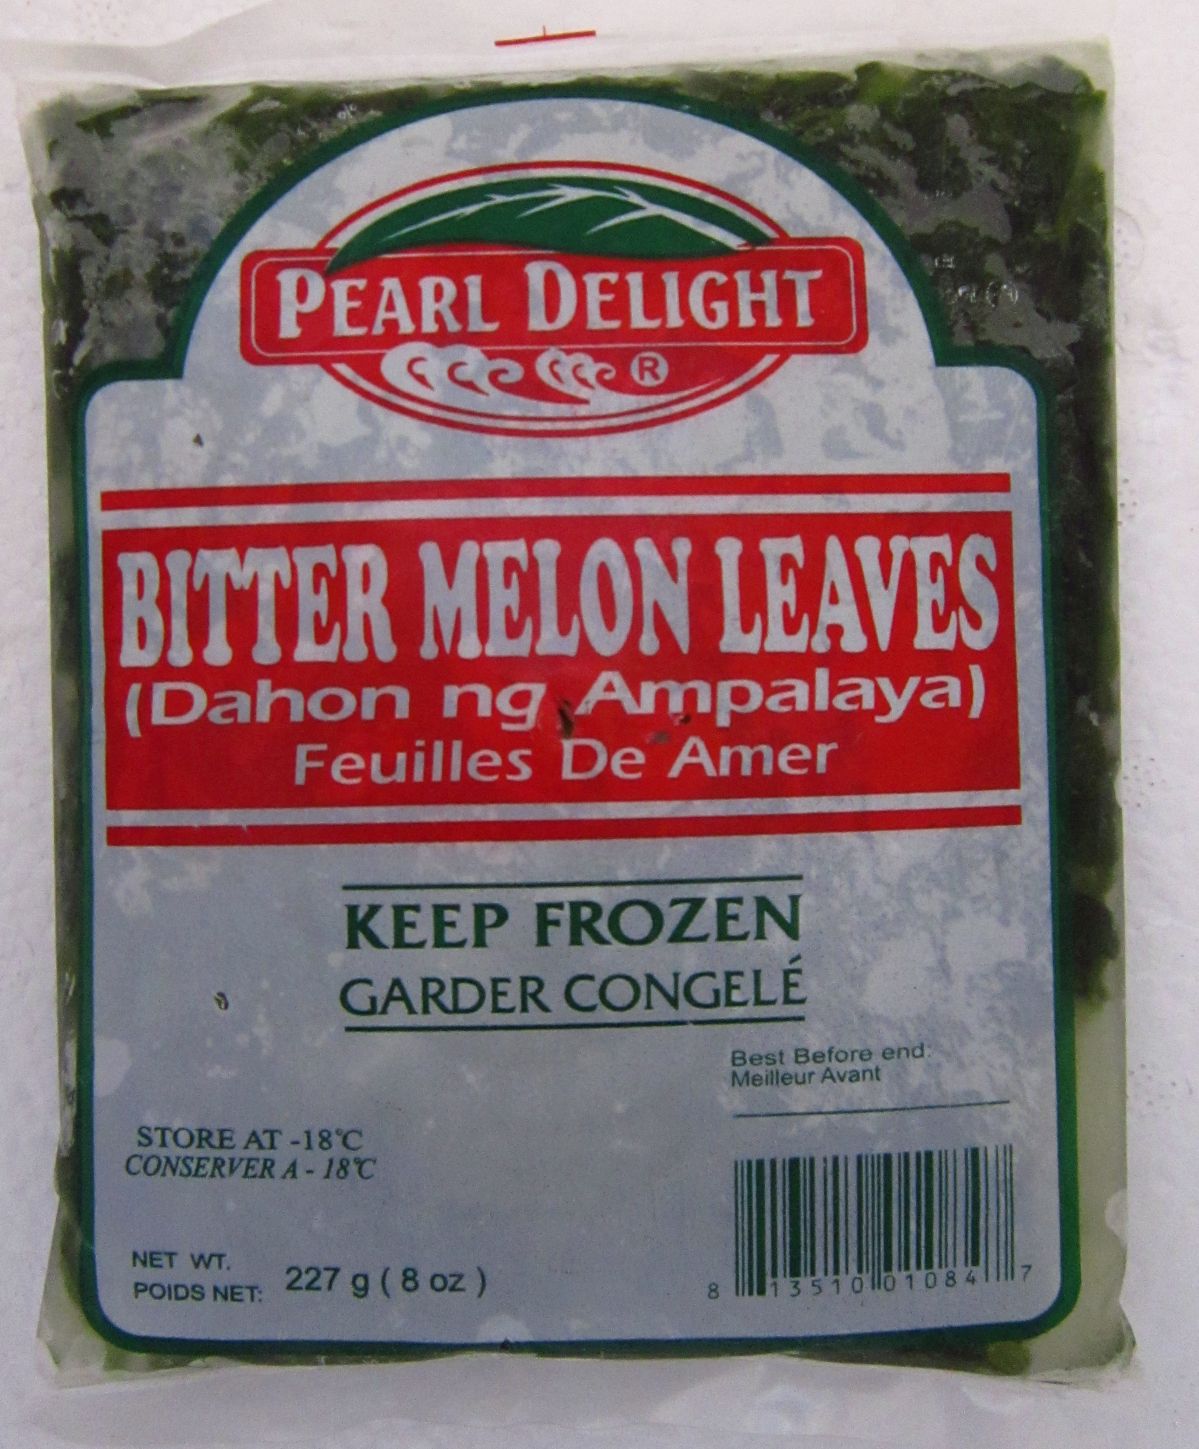 Pearl Delight Bitter Melon Leaves Image